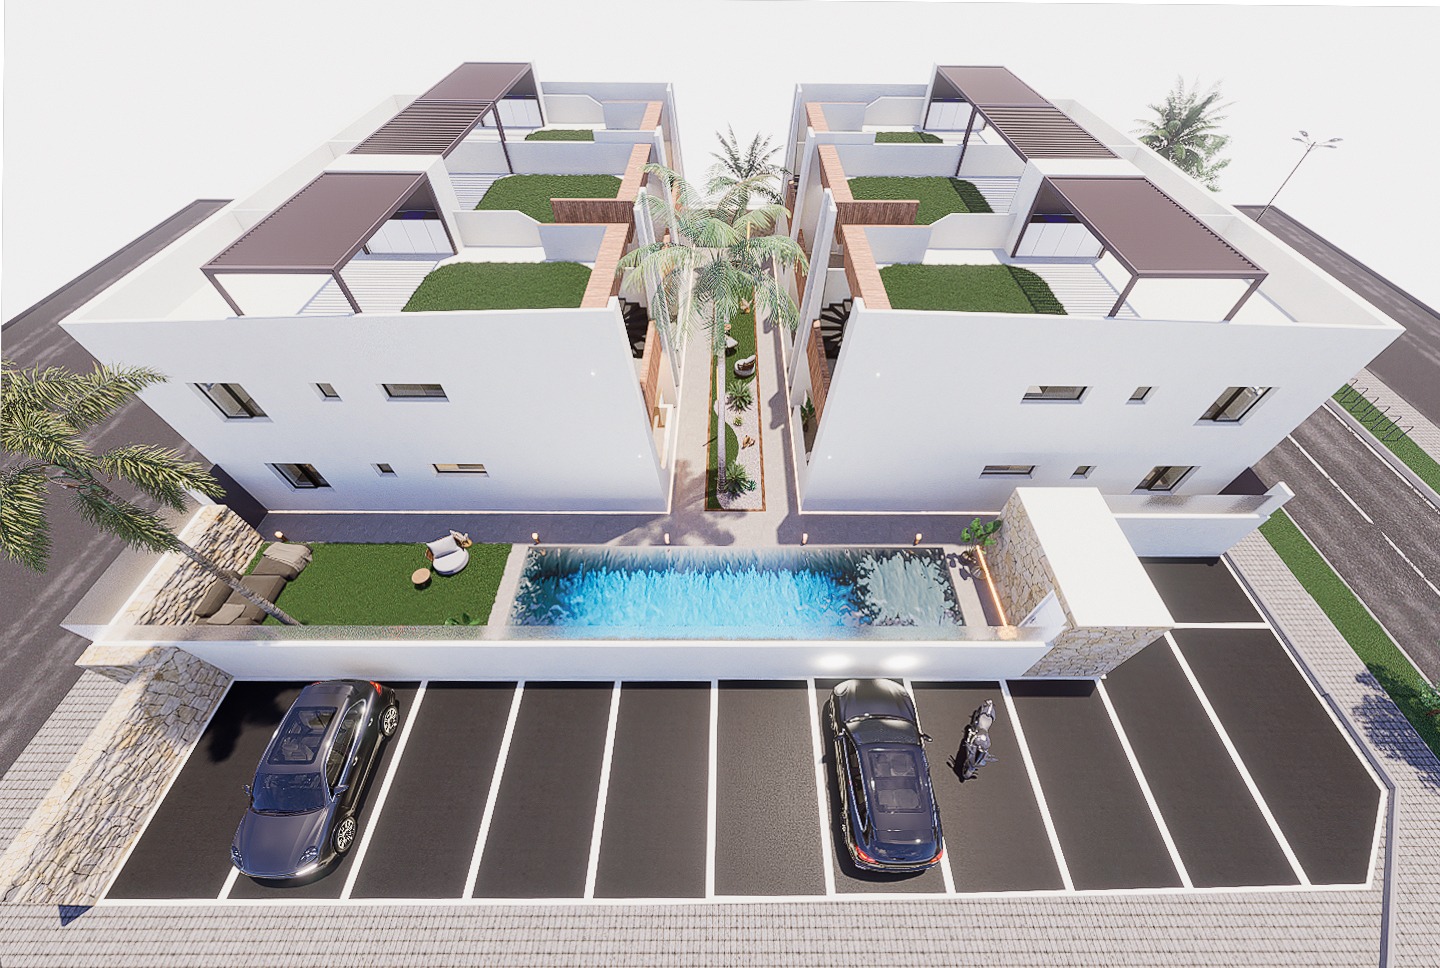 Apartment for sale in San Pedro del Pinatar and San Javier 9